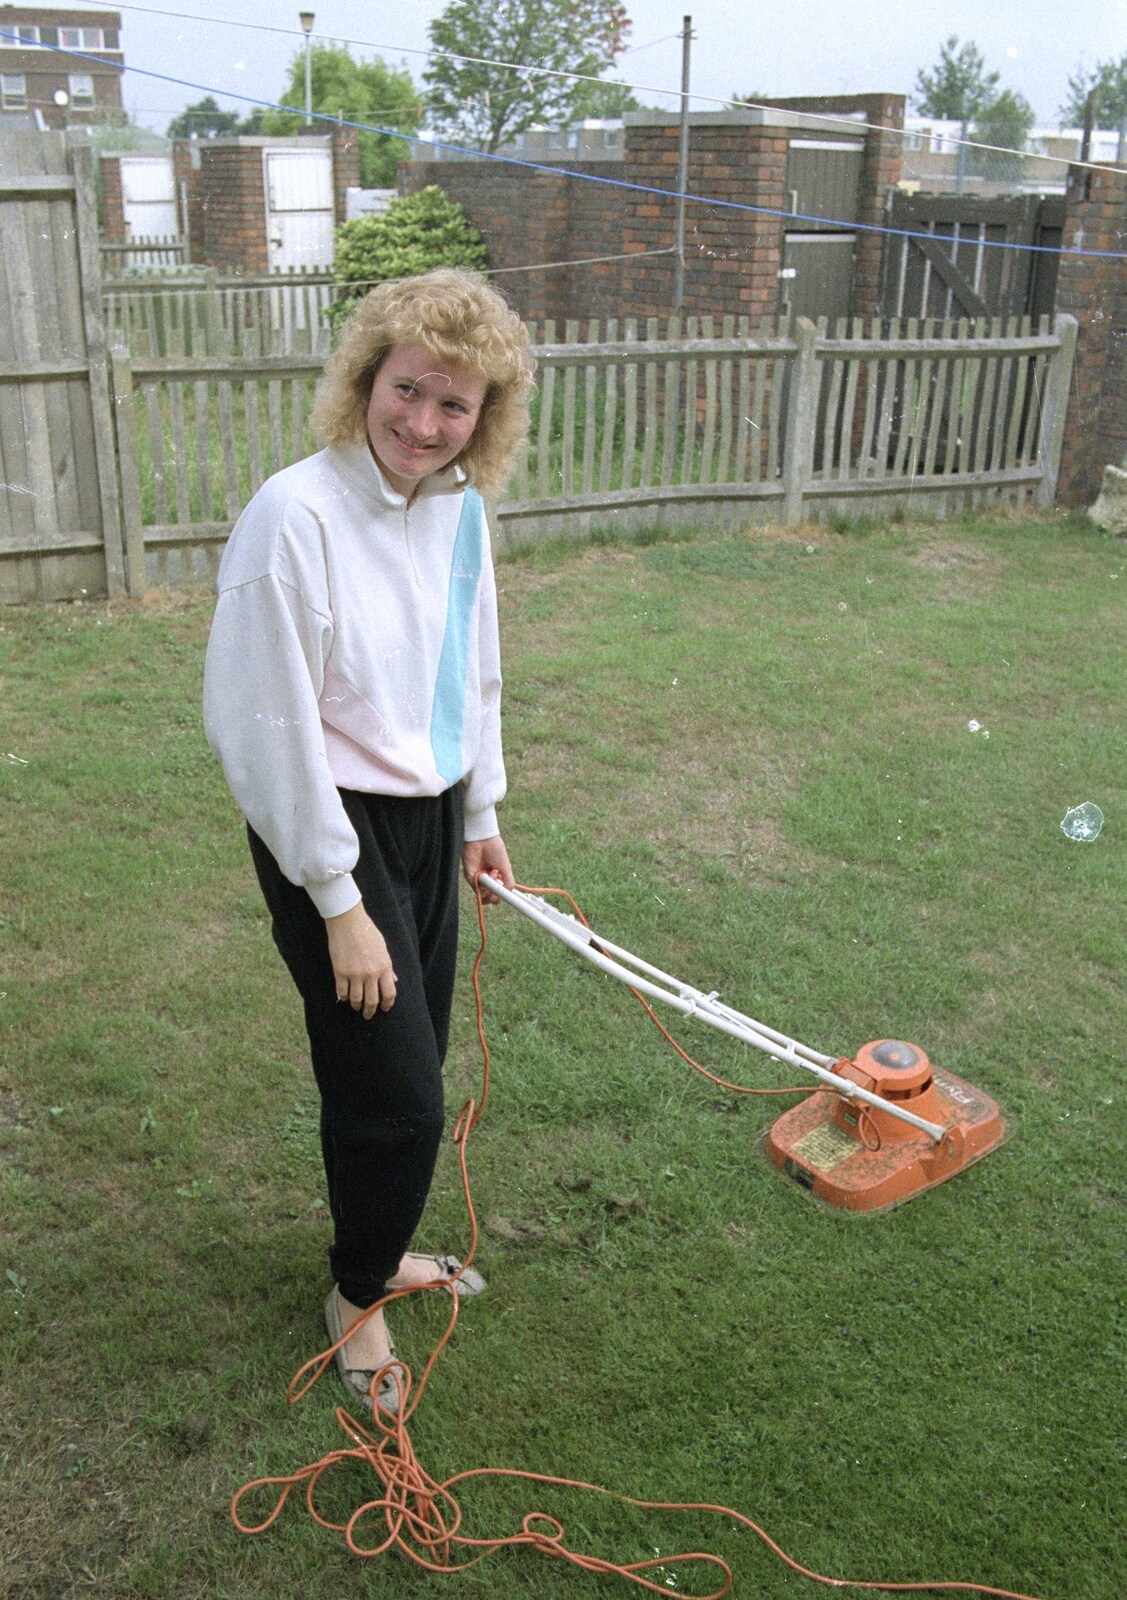 Maria does a spot of mowing with the Flymo from A Trip to Sean's, and a Battle of Britain Flypast, Farnborough, Suffolk and London - 15th September 1990